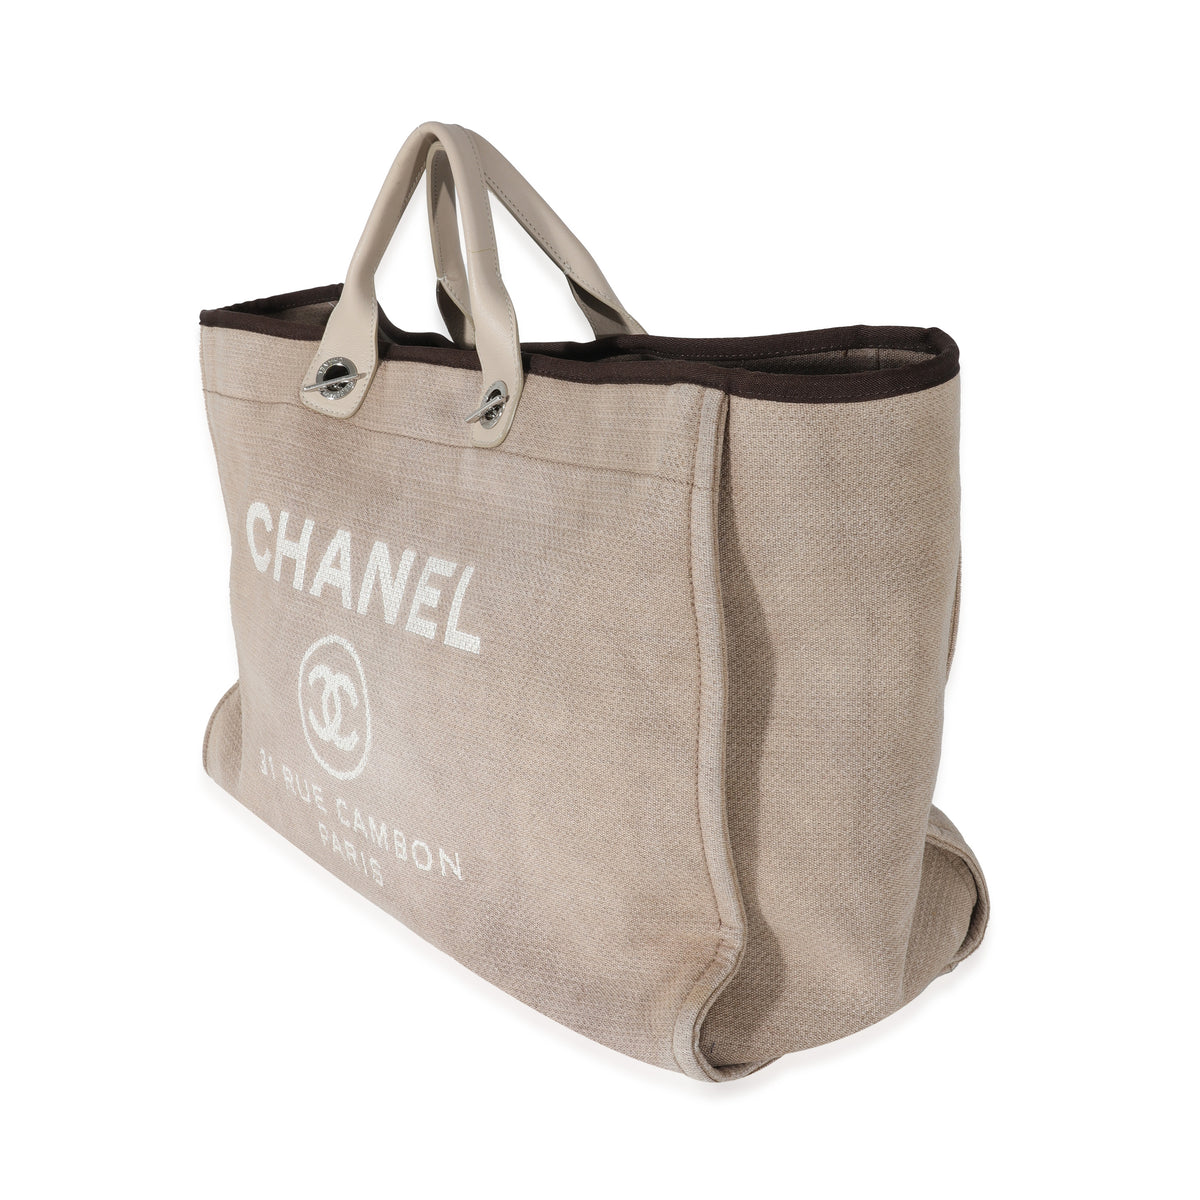 Chanel Beige Canvas Large Deauville Tote, myGemma